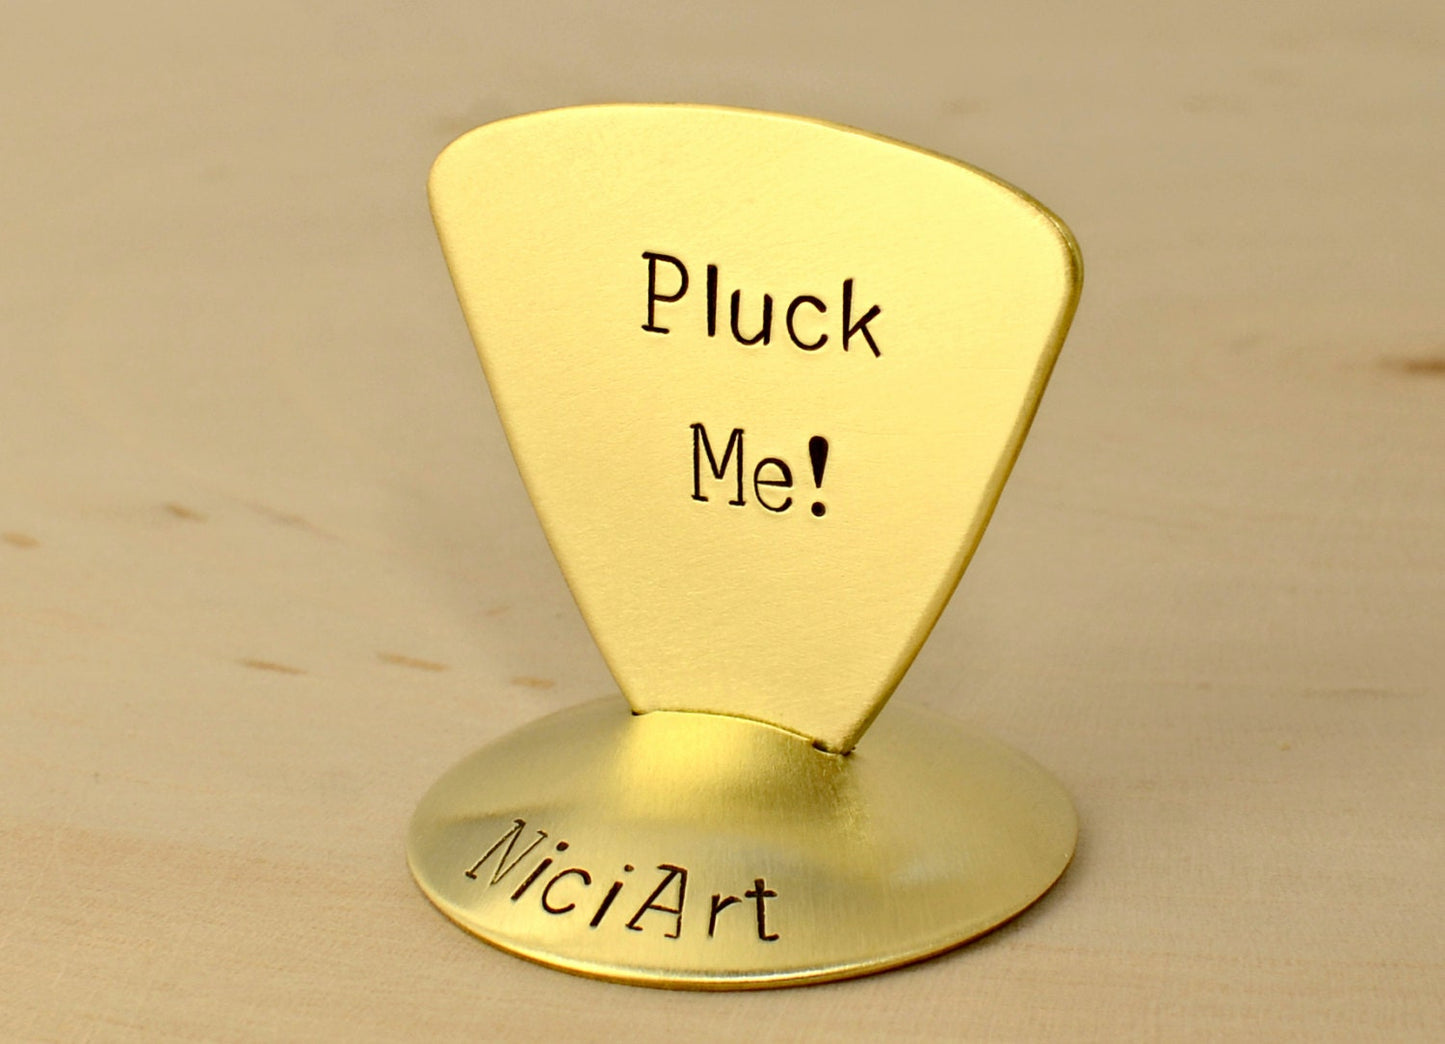 Triangular Bass Style Guitar Pick stamped with Pluck Me